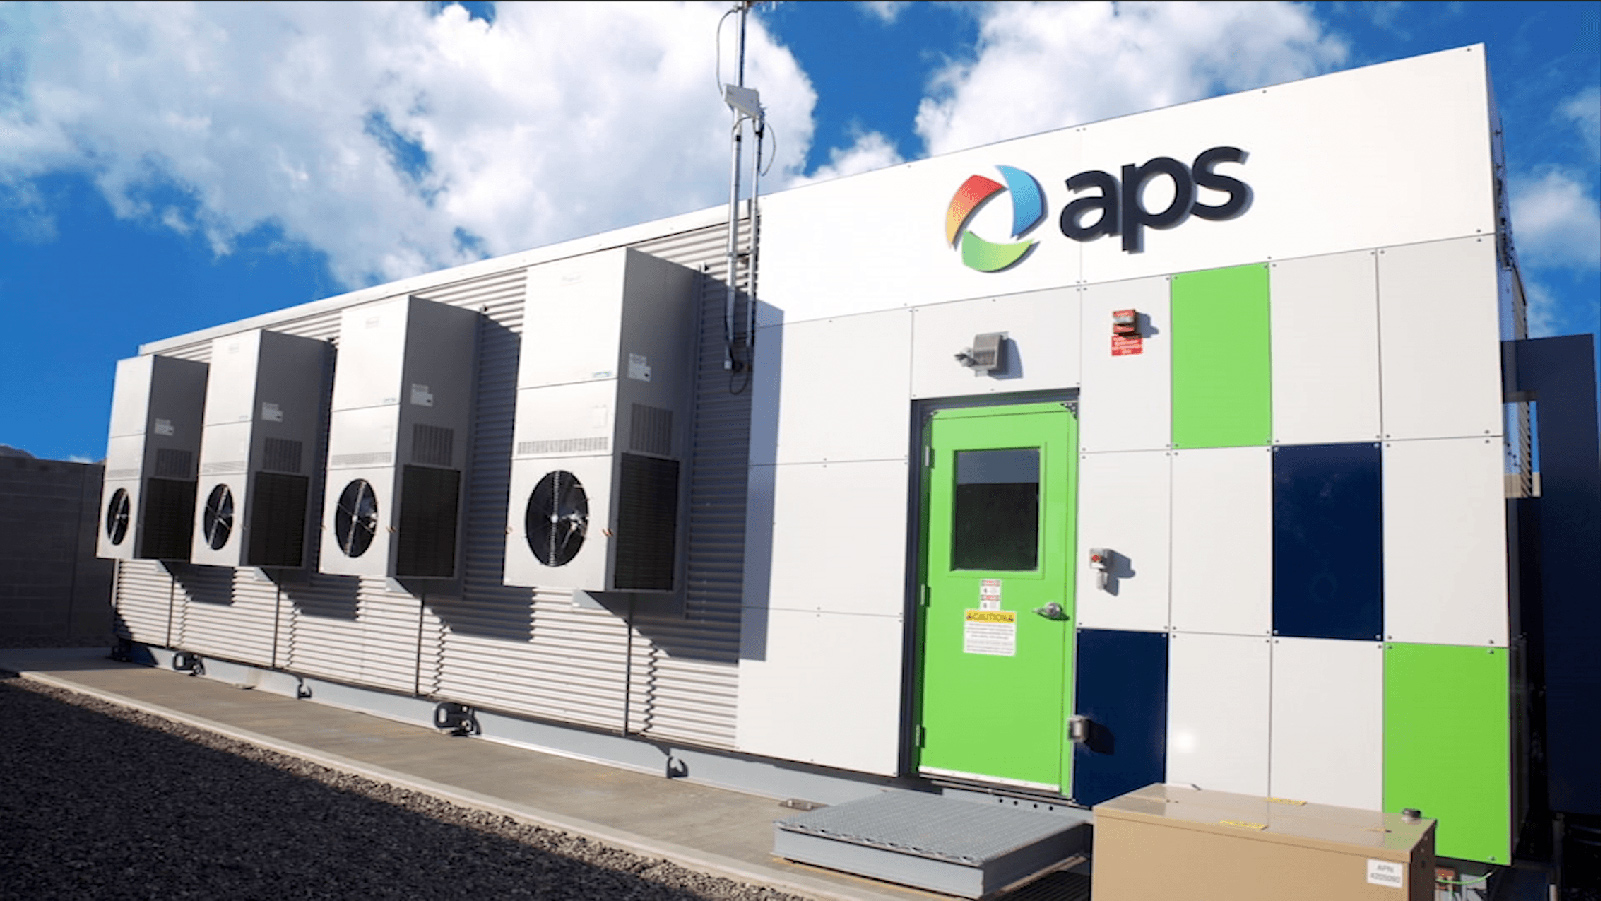 APS battery storage facility with a blue sky and clouds.